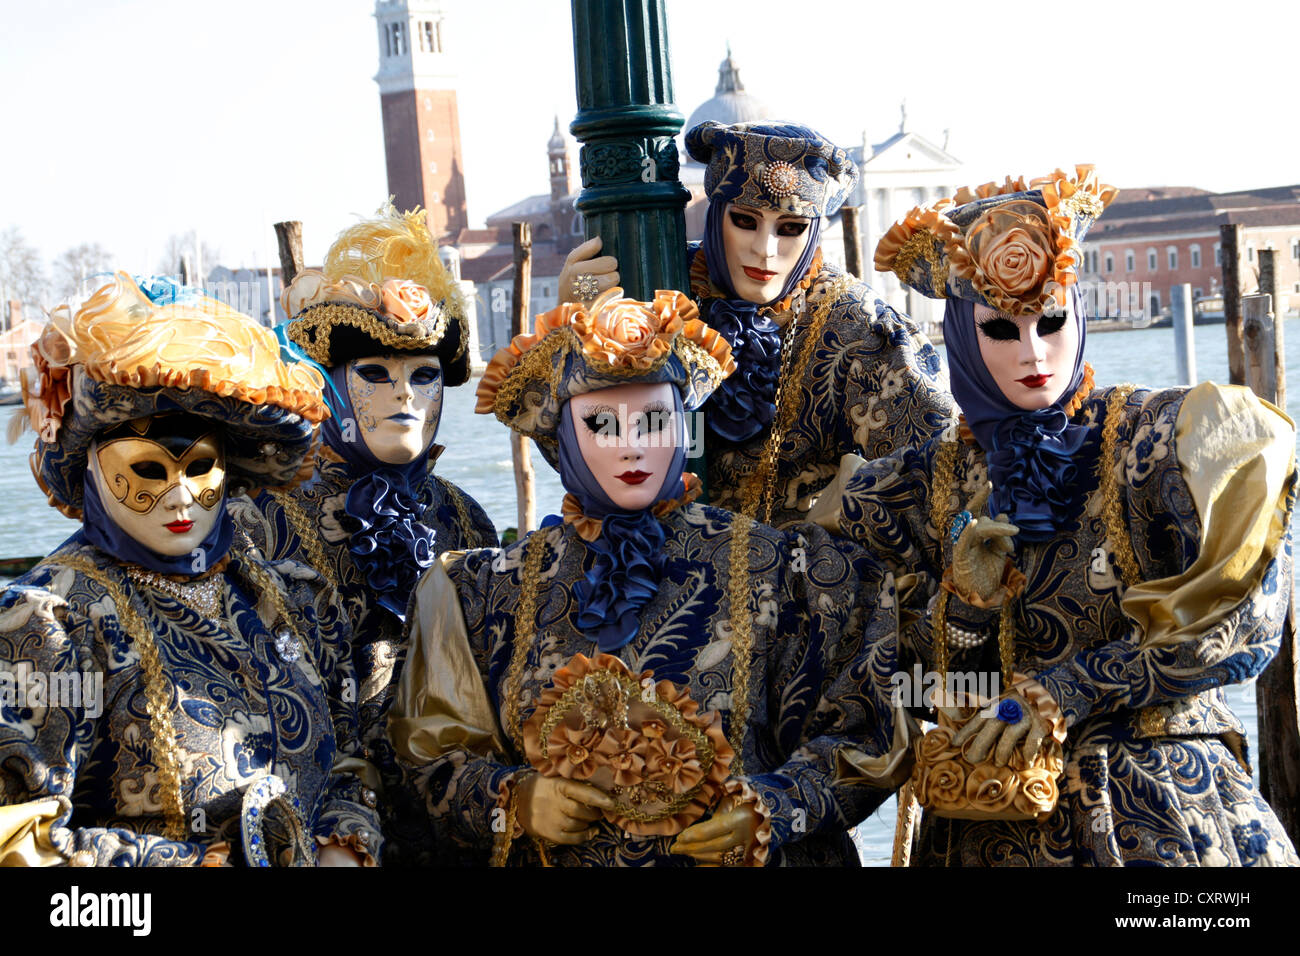 Mask wearers, Carnival in Venice, Italy, Europe Stock Photo